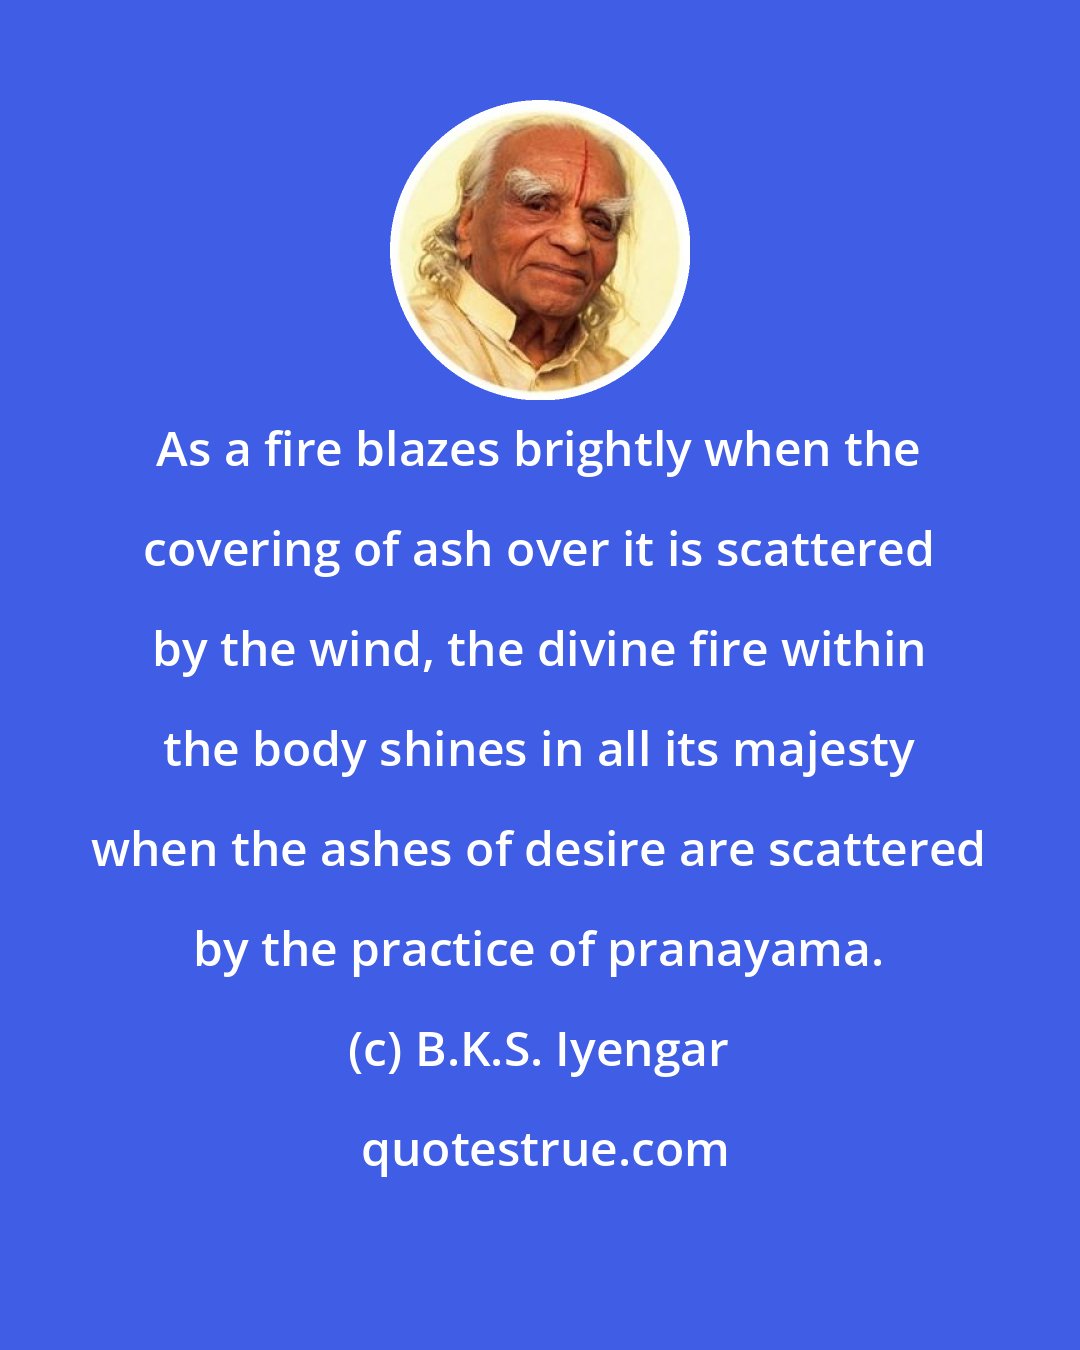 B.K.S. Iyengar: As a fire blazes brightly when the covering of ash over it is scattered by the wind, the divine fire within the body shines in all its majesty when the ashes of desire are scattered by the practice of pranayama.